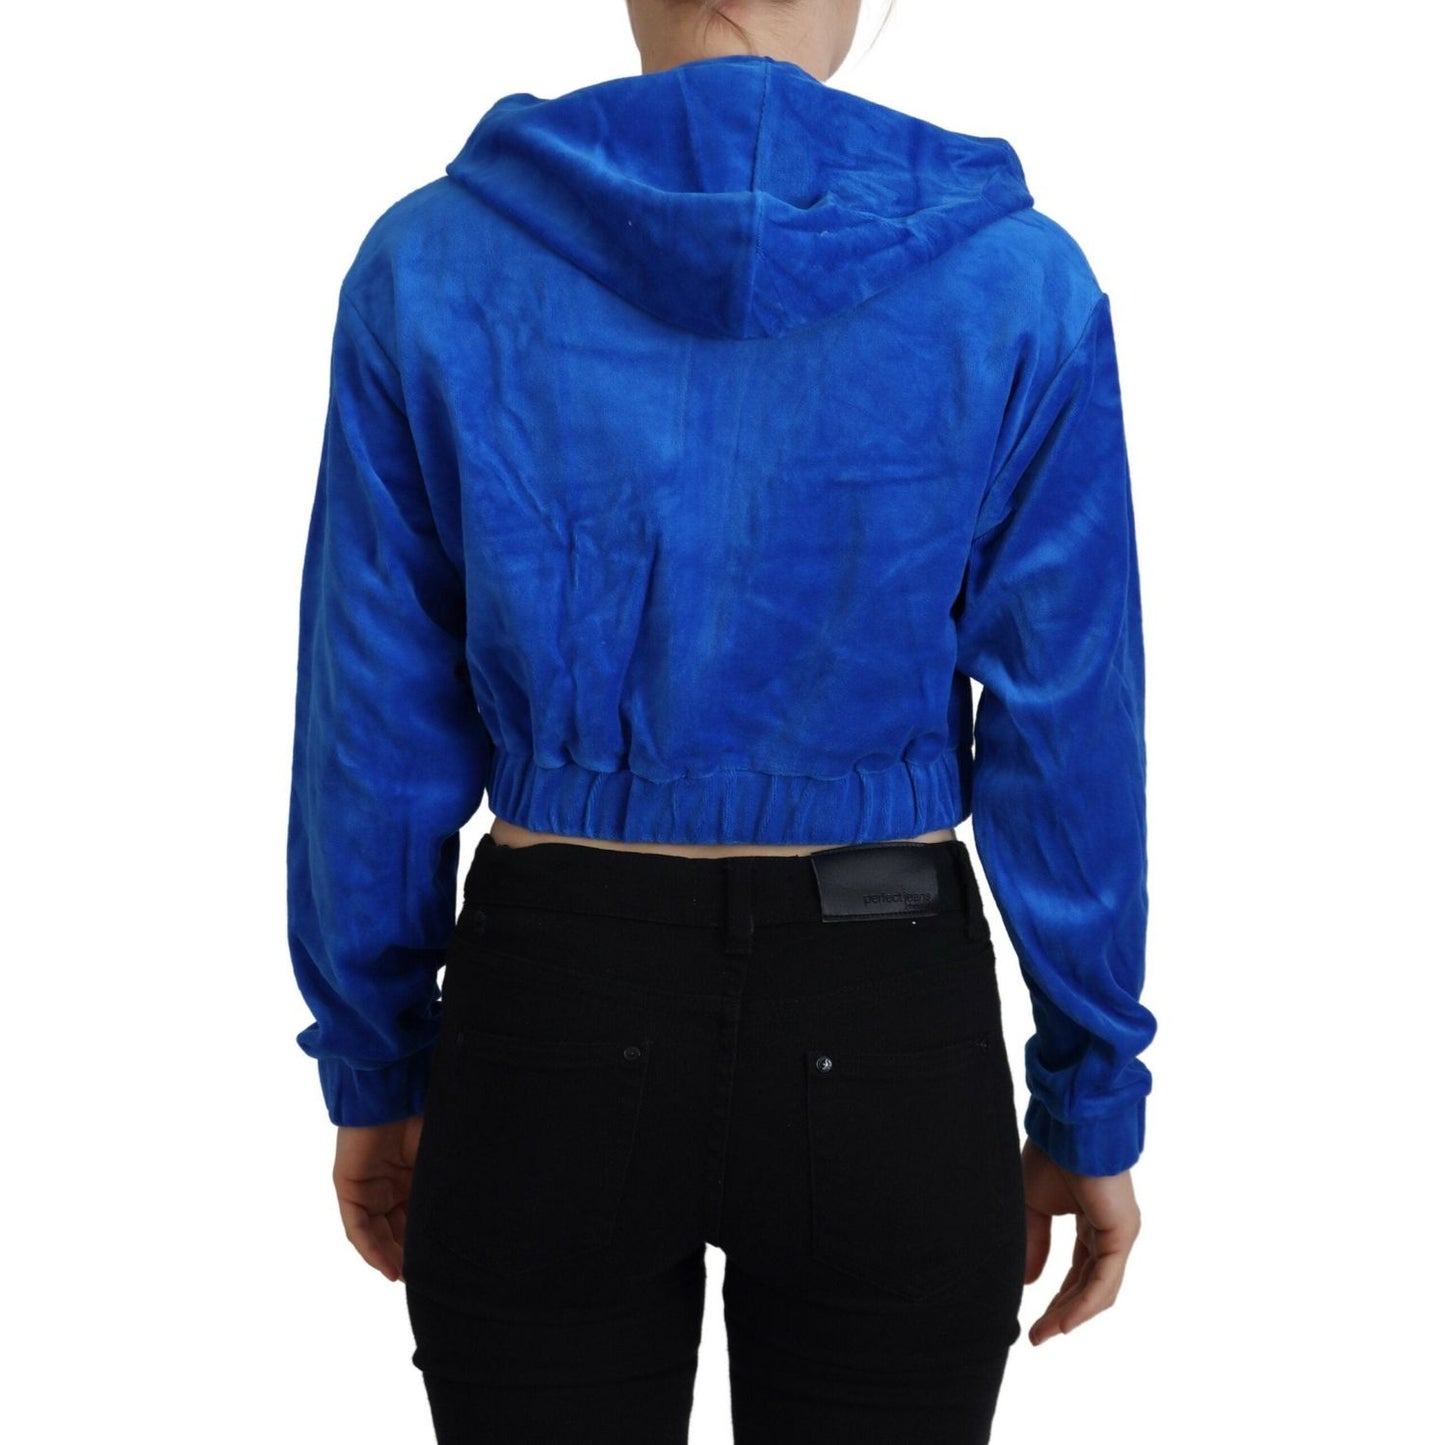 Juicy Couture | Glam Hooded Zip Cropped Sweater in Blue| McRichard Designer Brands   